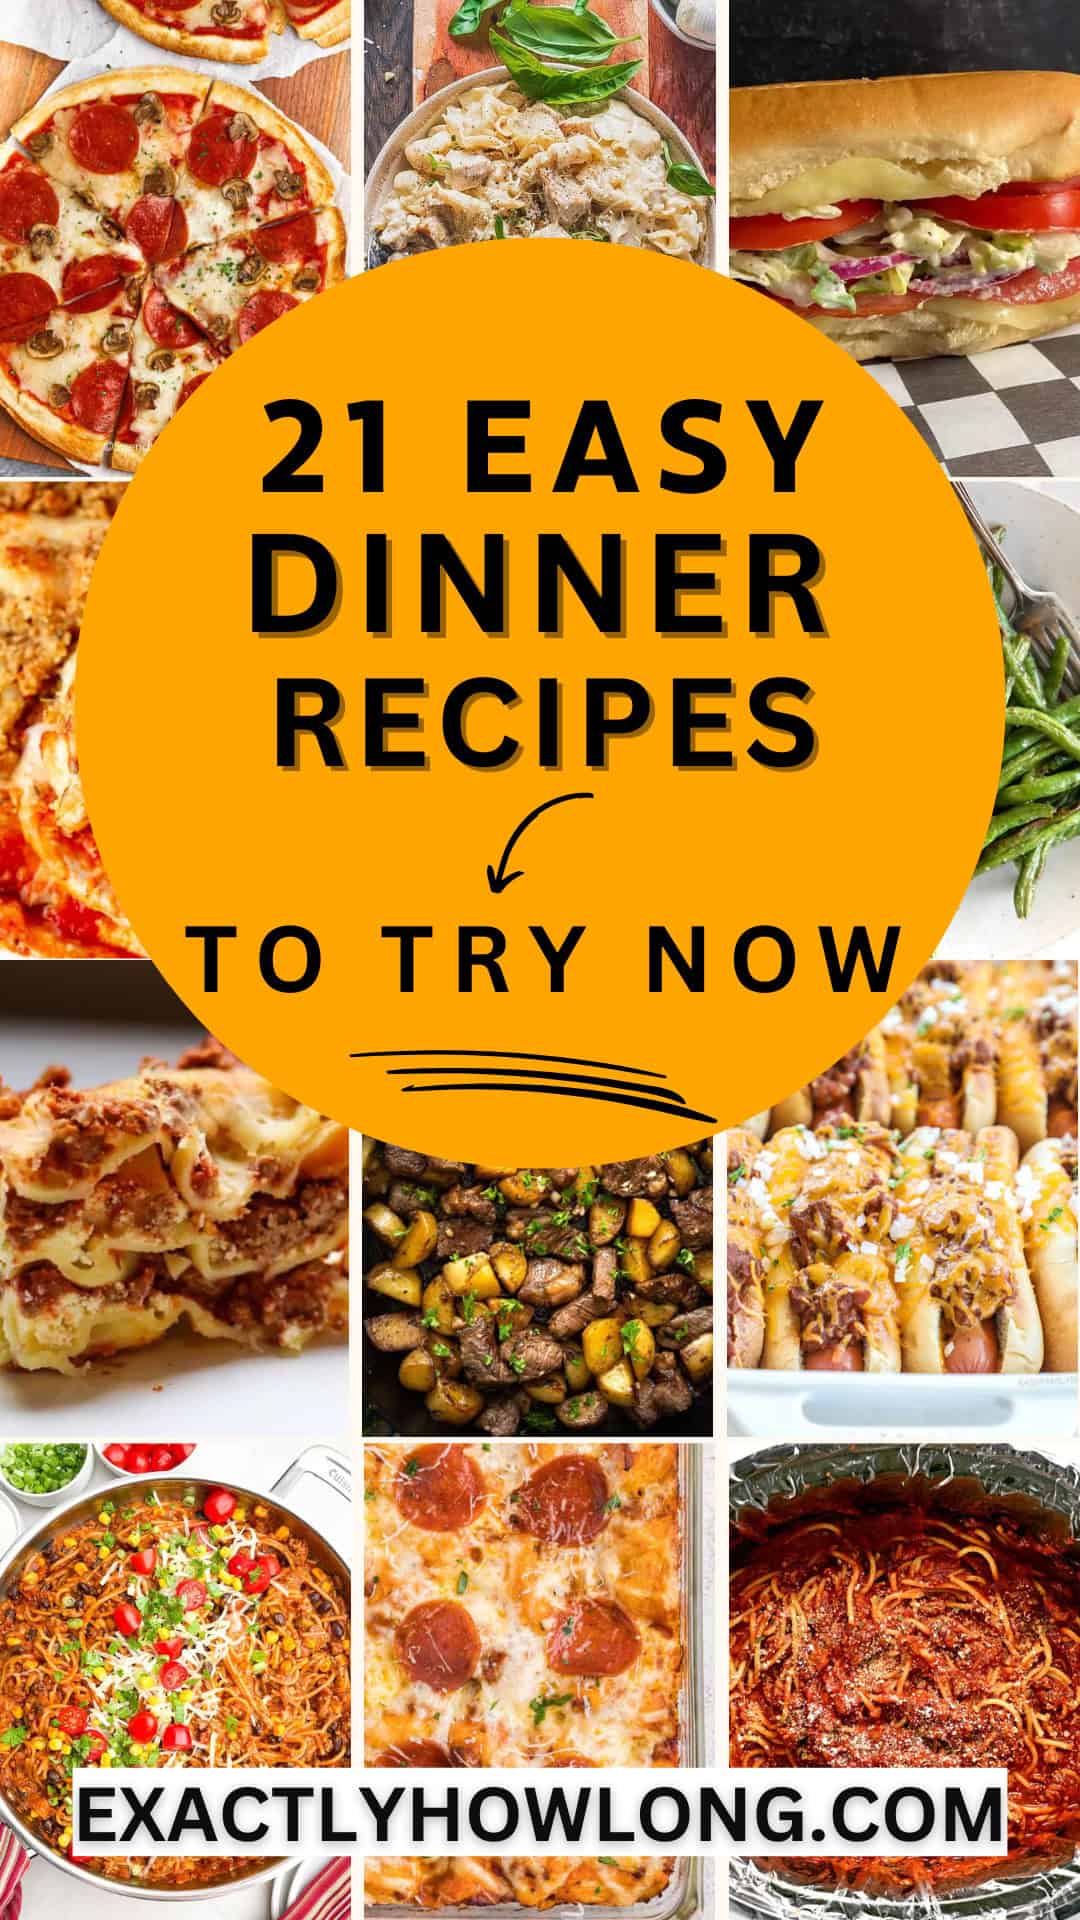 Family dinner recipes that are simple, quick, and easy to make.